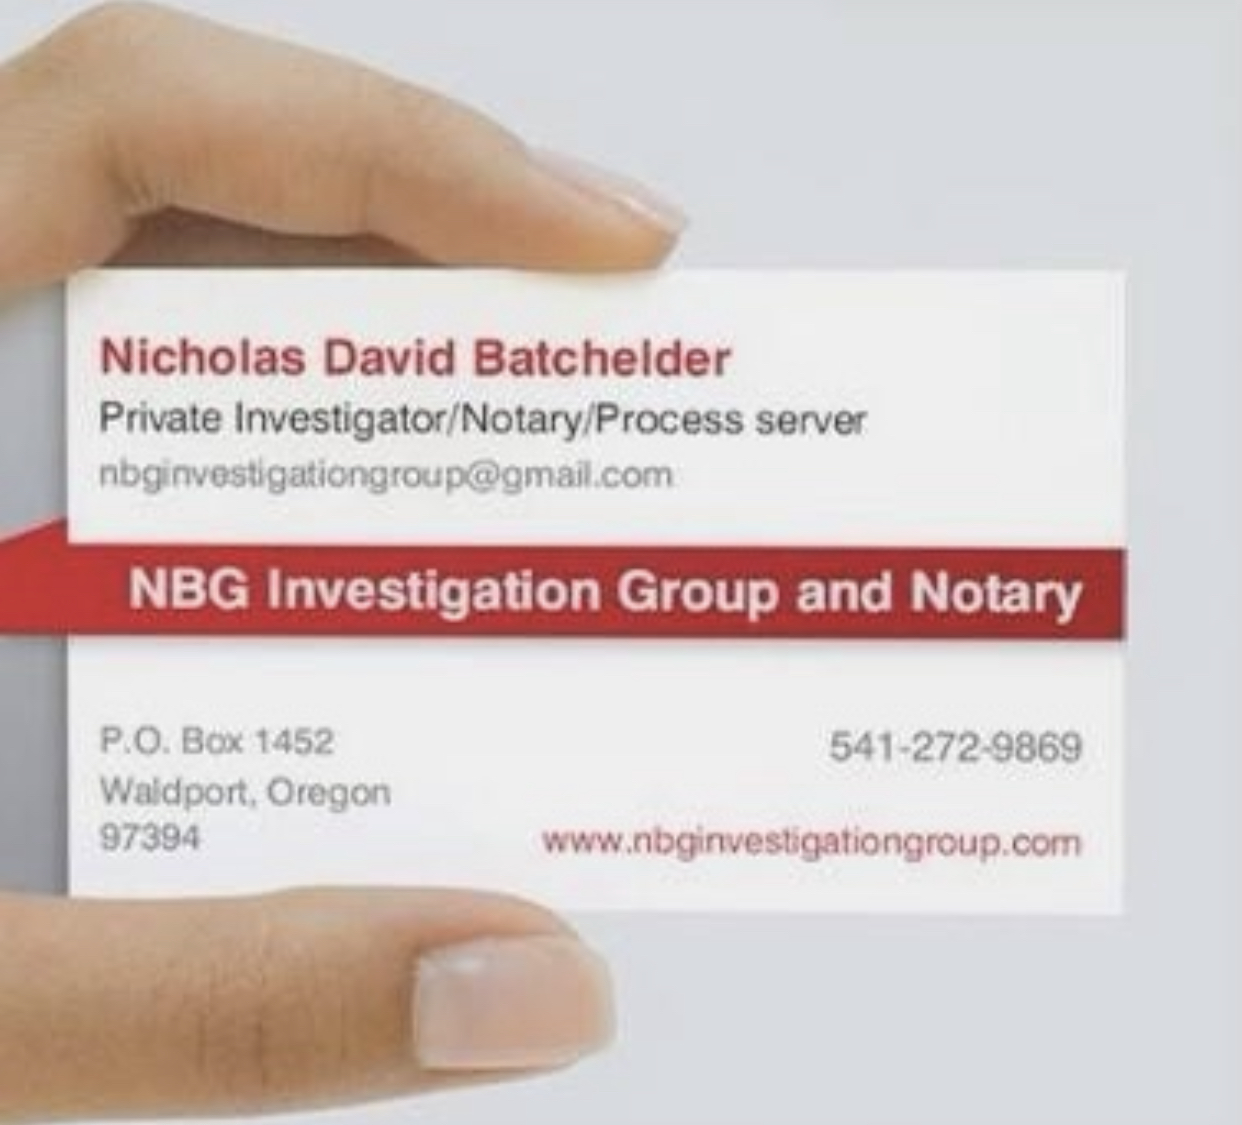 NBG Investigation Group & Notary 205 SW Hwy 101 suite b, Waldport Oregon 97394